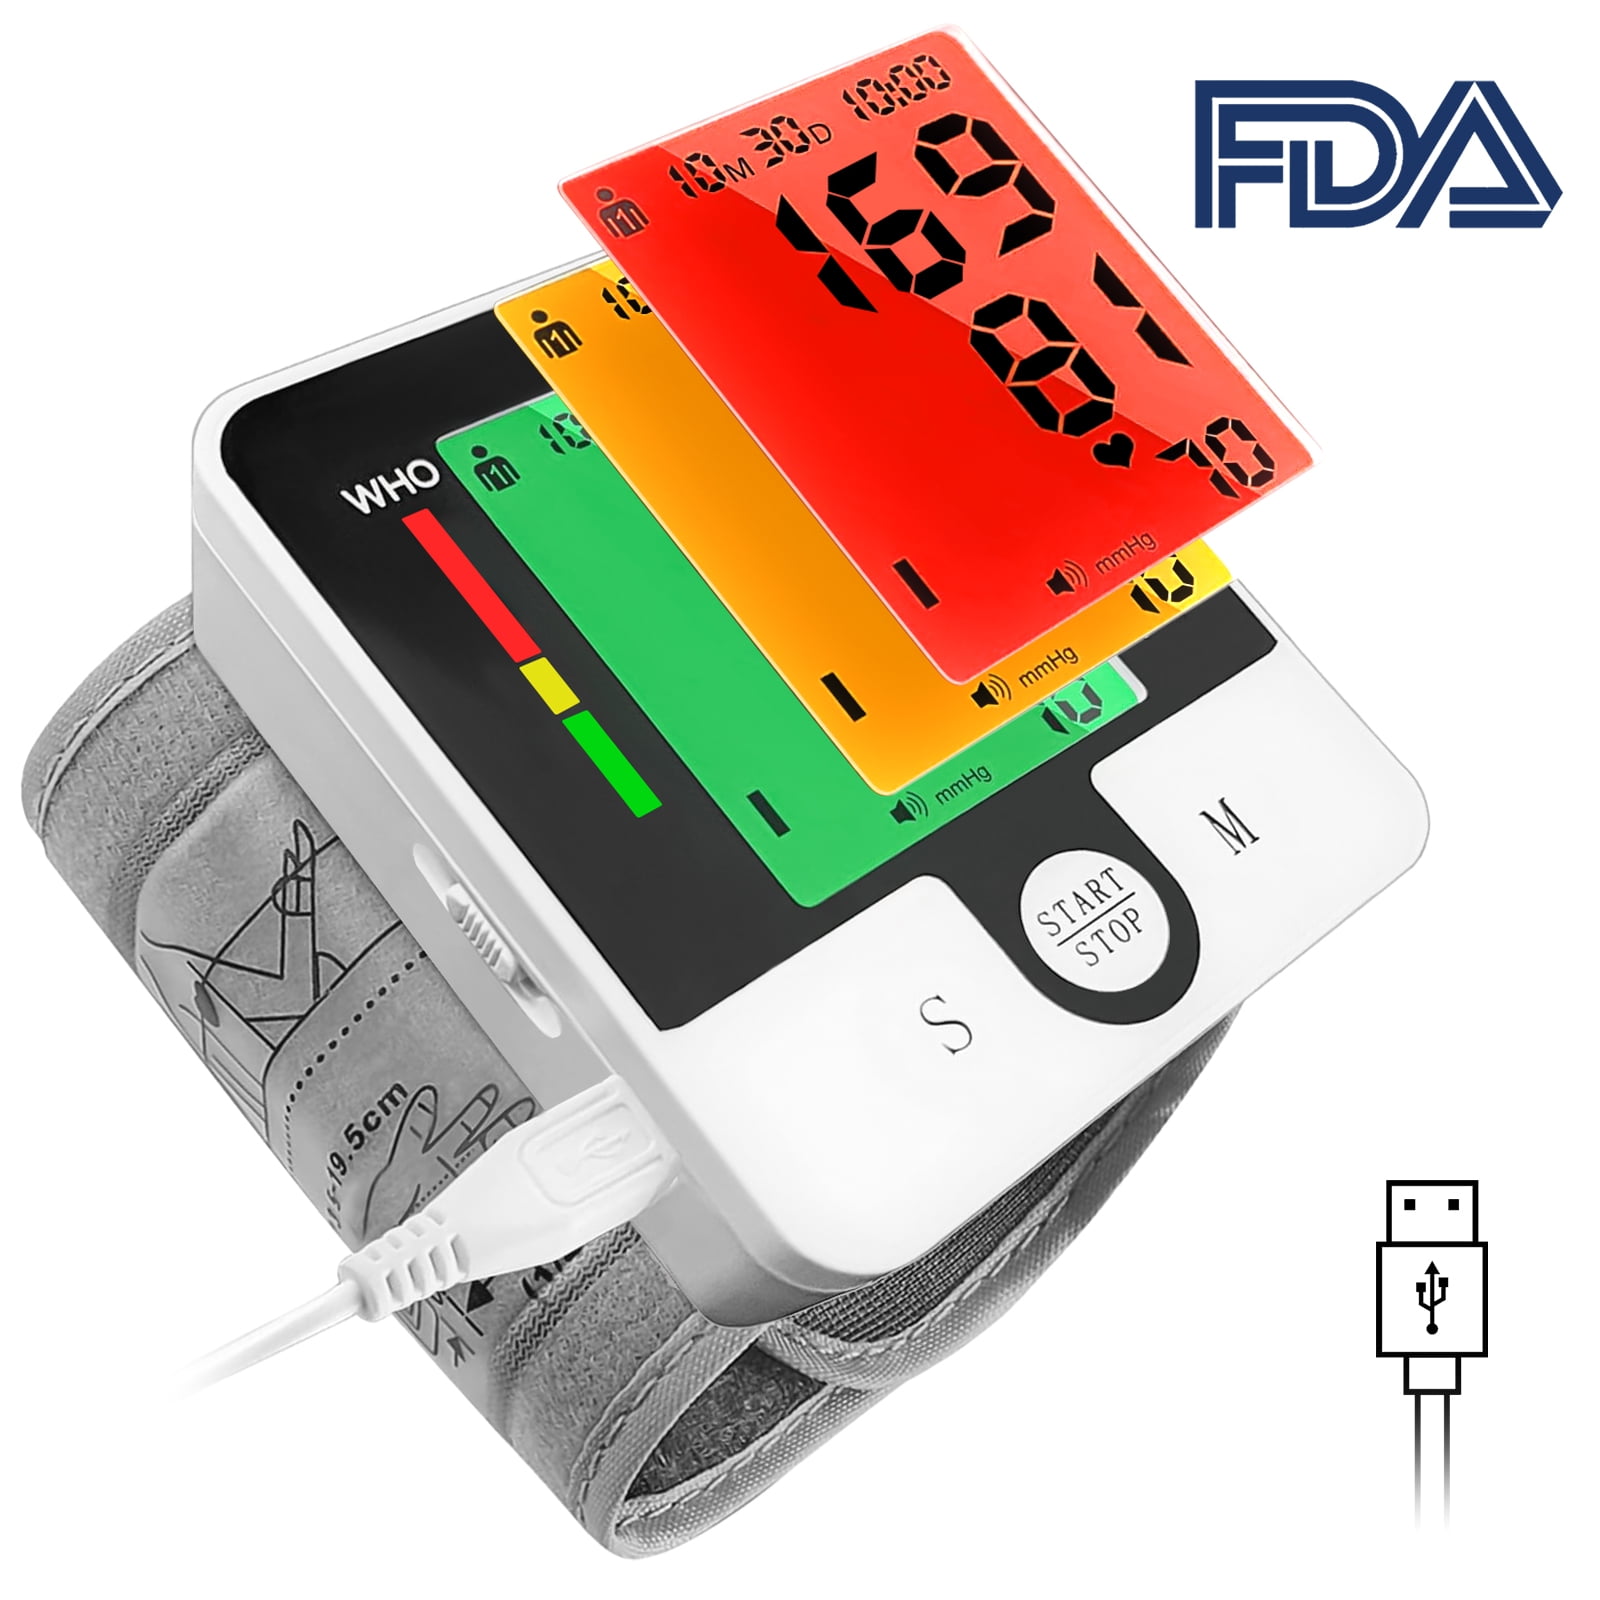 Wrist Blood Pressure Monitor with Cuff, RENPHO Blood Pressure Machine for  Home Use with Speaker, Accurate Automatic Digital BP Cuffs with Large LCD  Display, 2-Users, 120 Recordings - Coupon Codes, Promo Codes